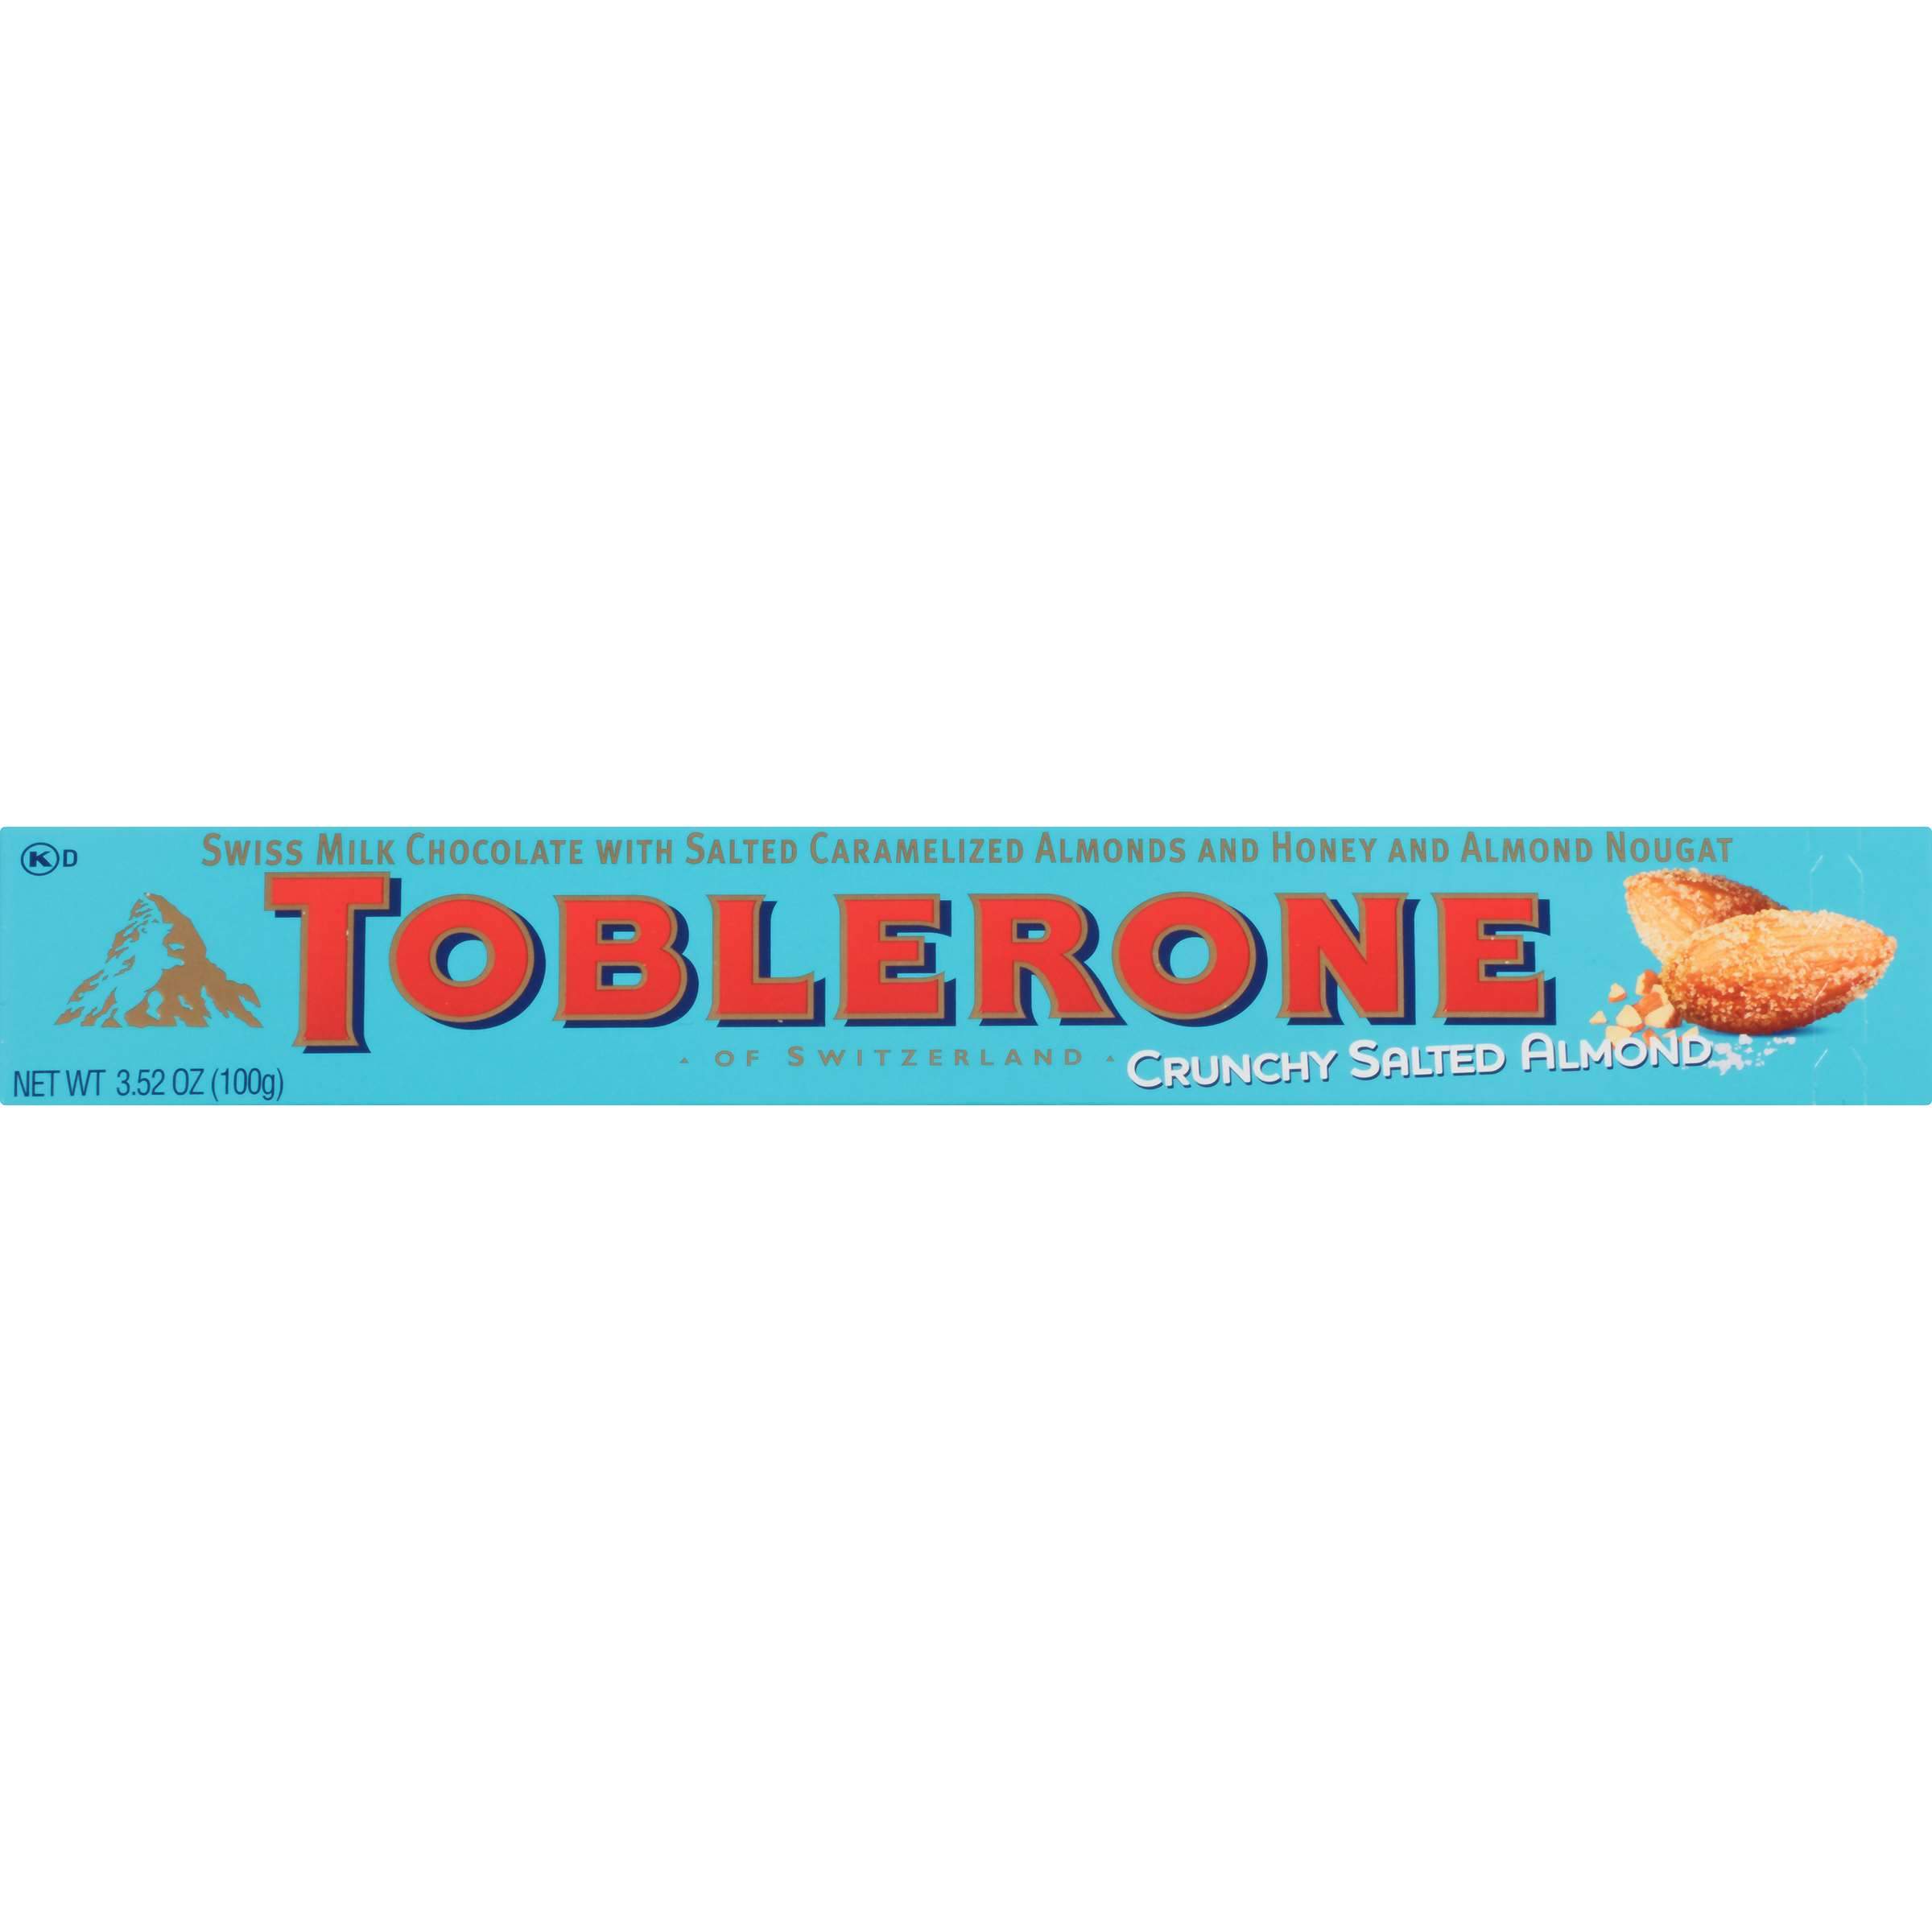 Toblerone Swiss Chocolate with Honey & Almond Nougat Meltable Toblerone Crunchy Salted Almond 3.52 Ounce 